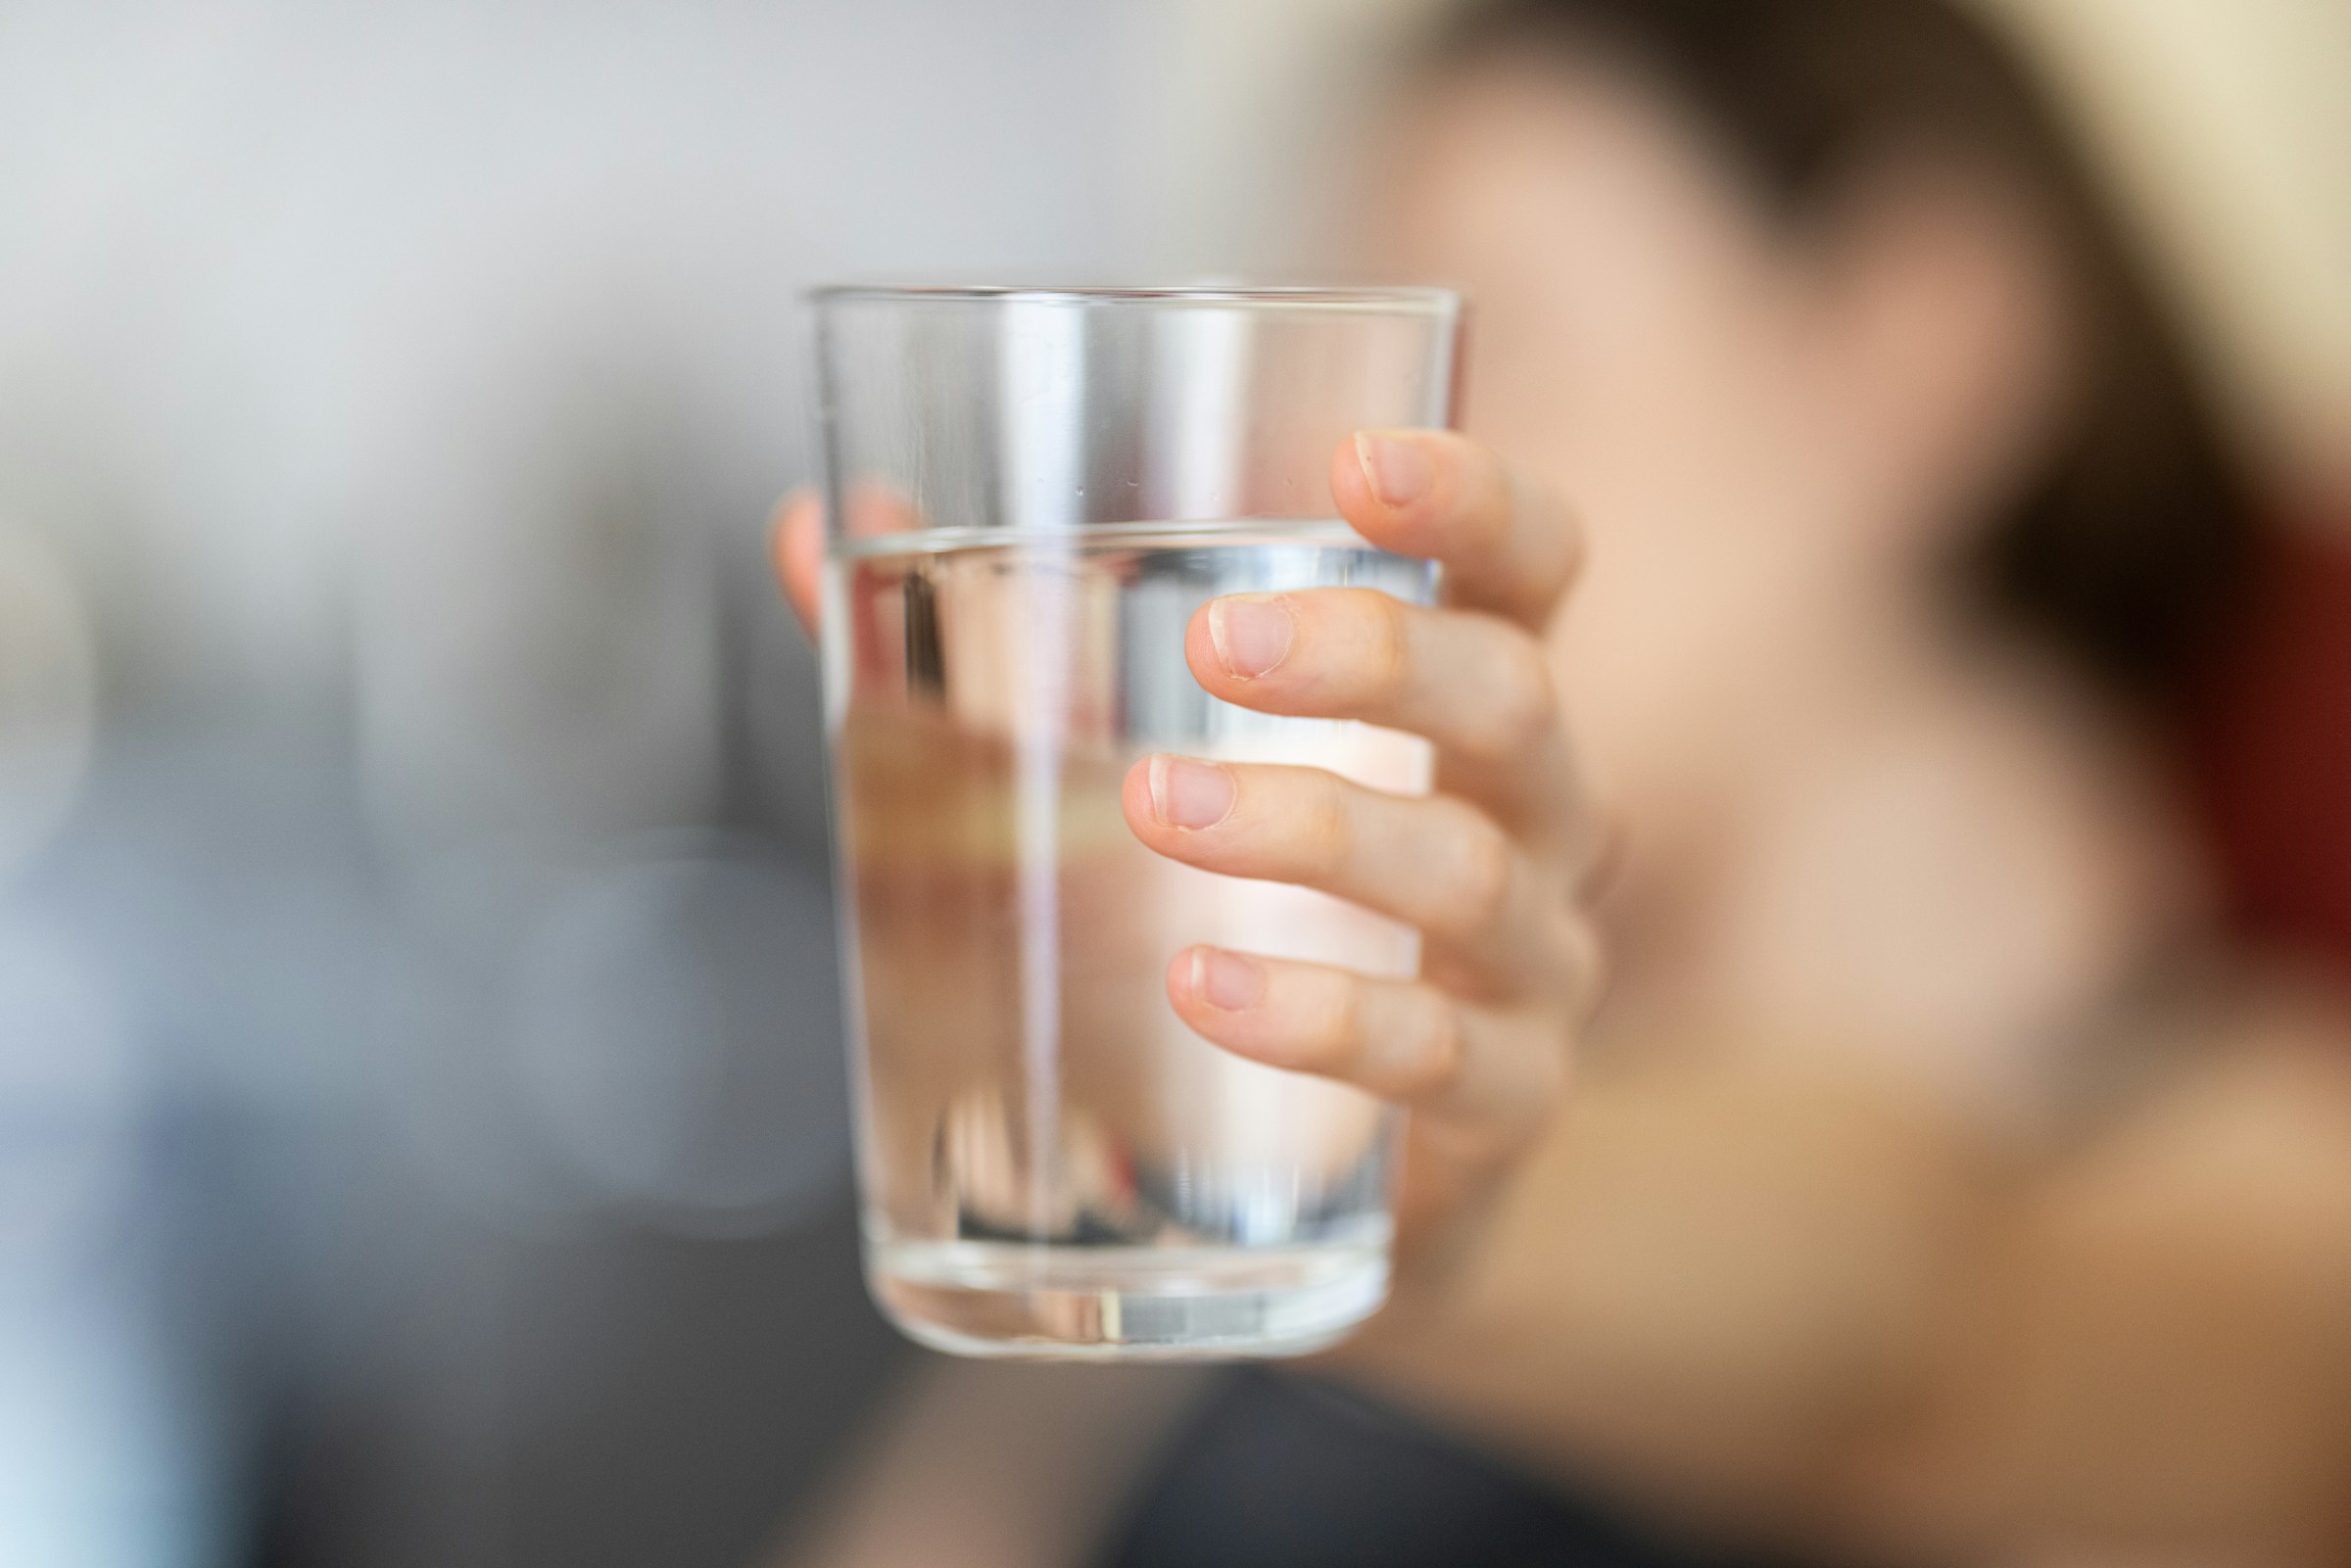 A person holding a glass of water | Source: Unsplash